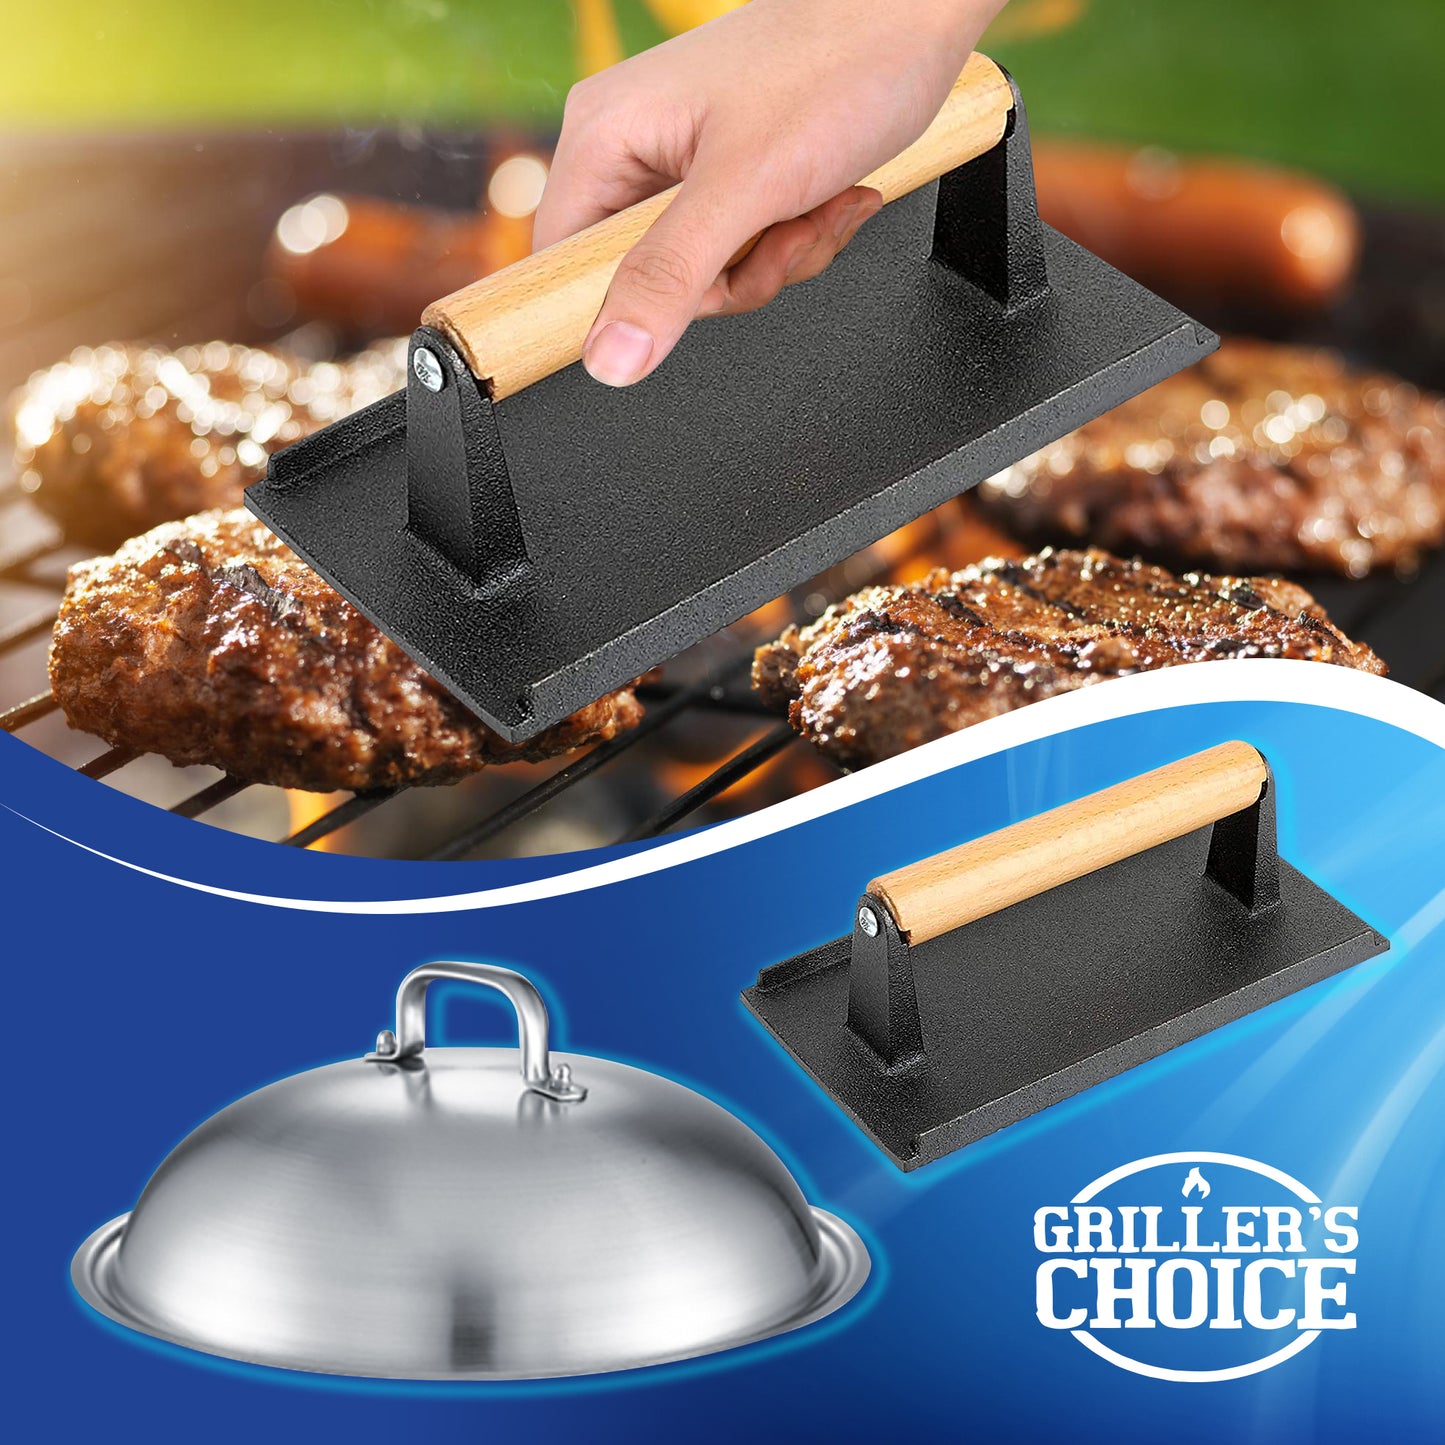 grillers choice, griddle accessory set, blackstone, griddle set, griddle spatula, griddle cleaning kit, griddle tools, flat top grill, flat top griddle set, bench scraper, griddle tools, grill tools, grill accessories, stainless steel spatula, blackstone accessories, blackstone set, hibachi, grilling utensils, BBQ tools